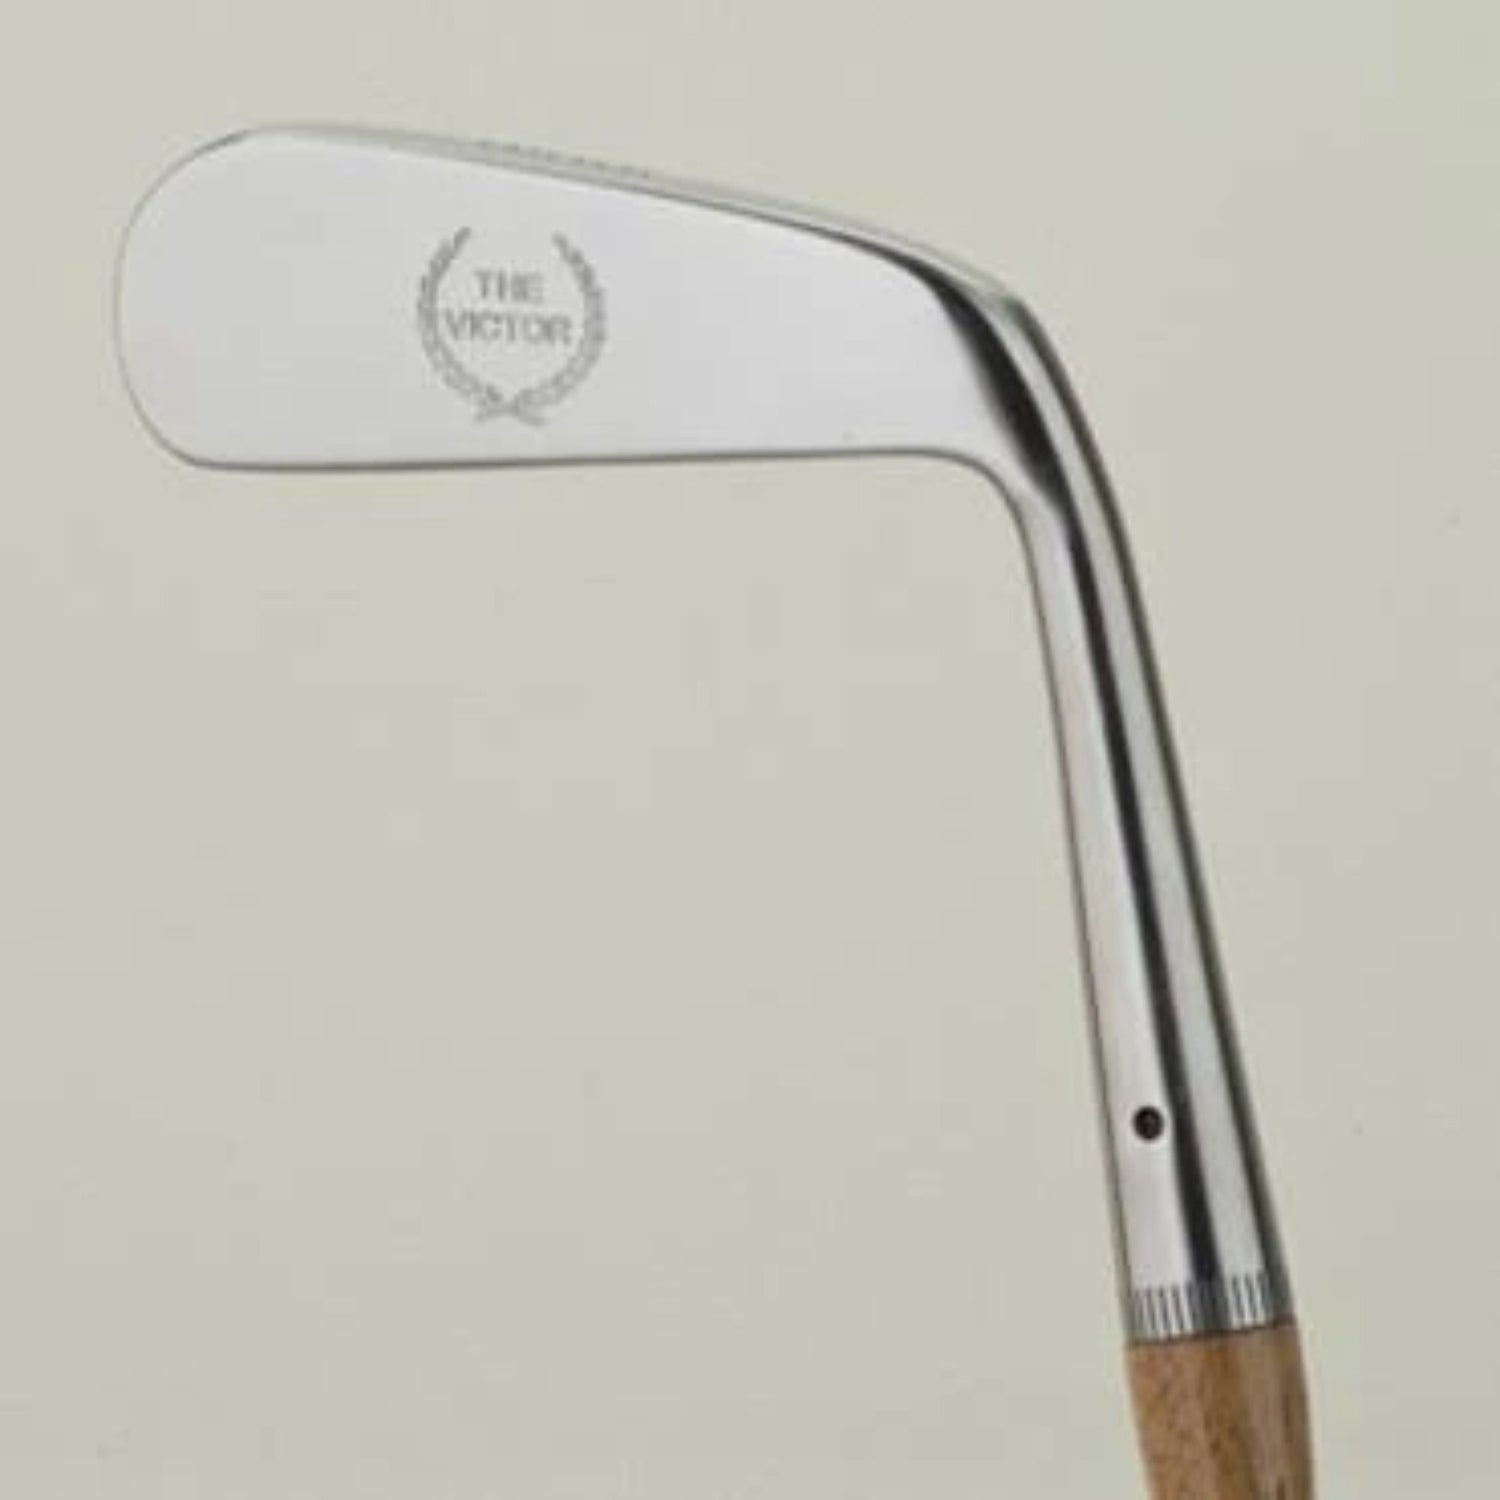 Tad Moore - The Victor Hickory Shafted Golf Blade Putter